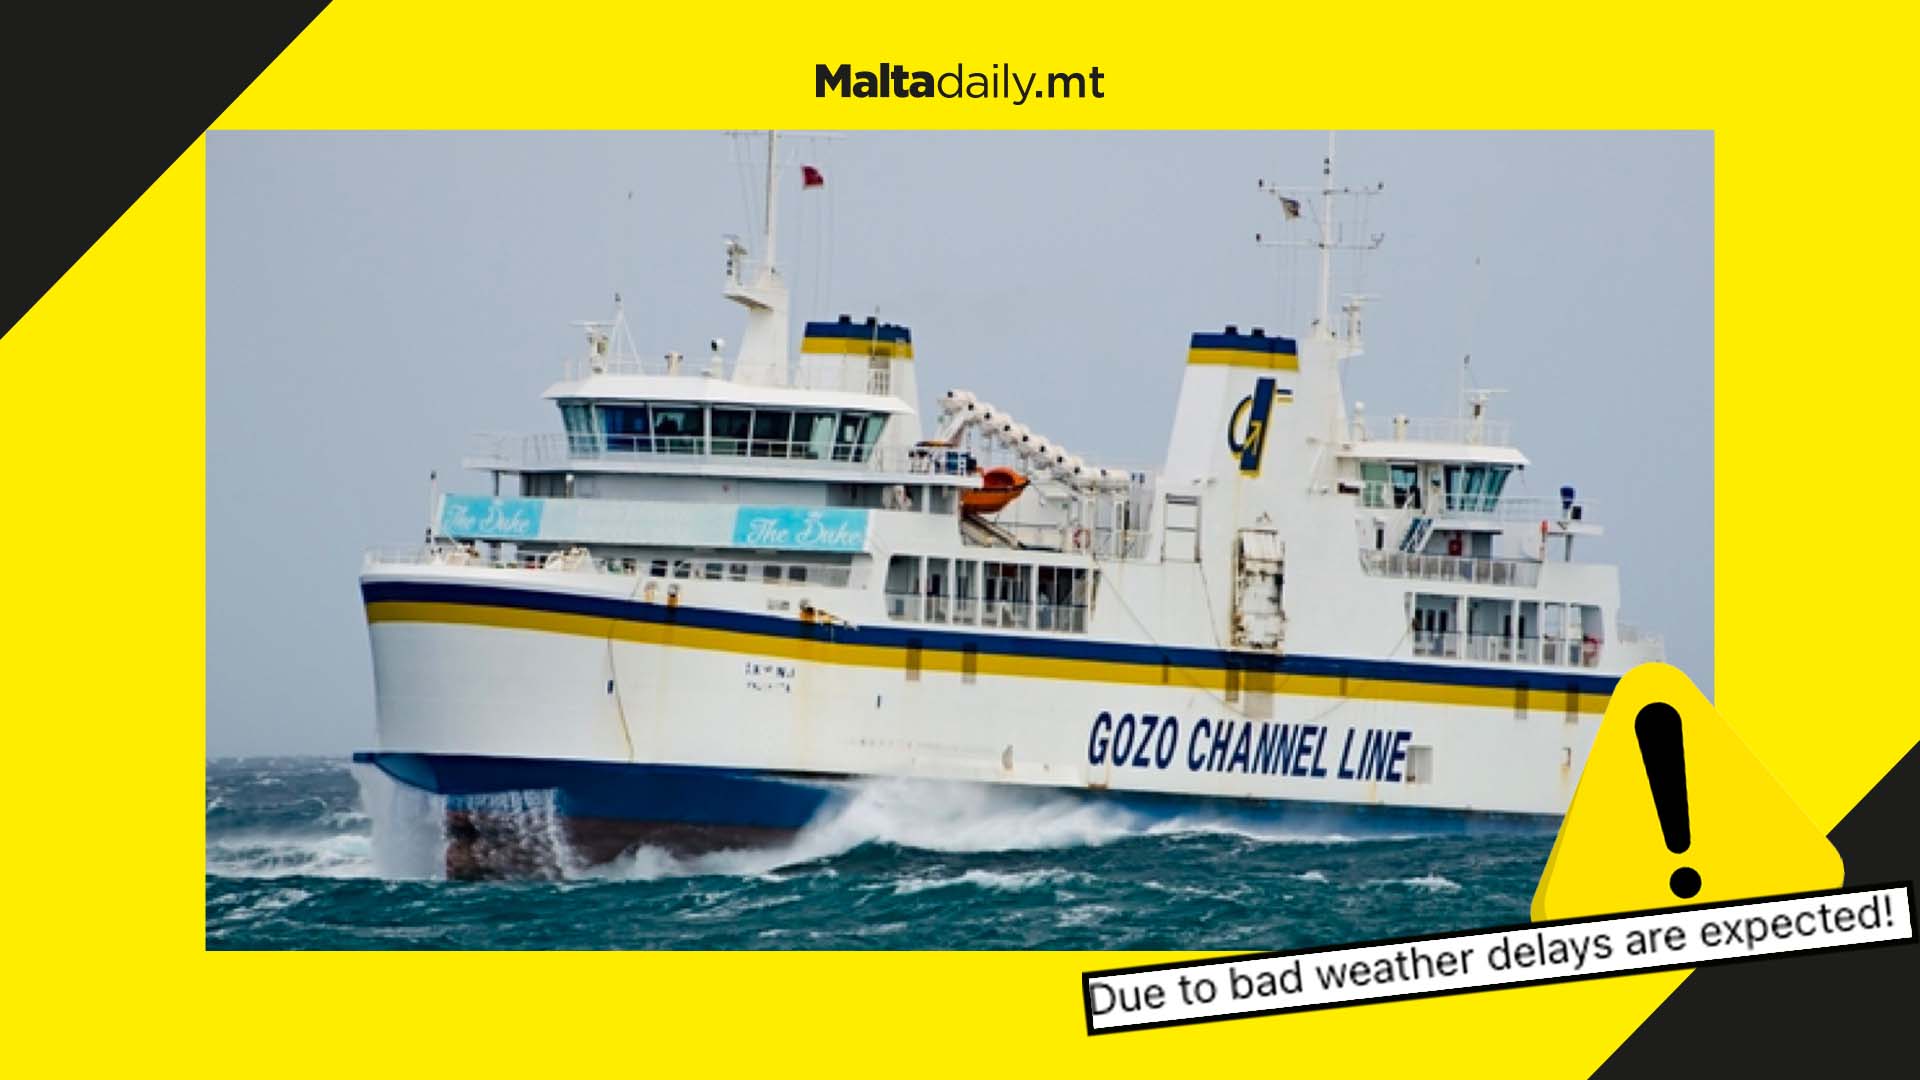 Strong gale winds as Gozo Channel announces delays